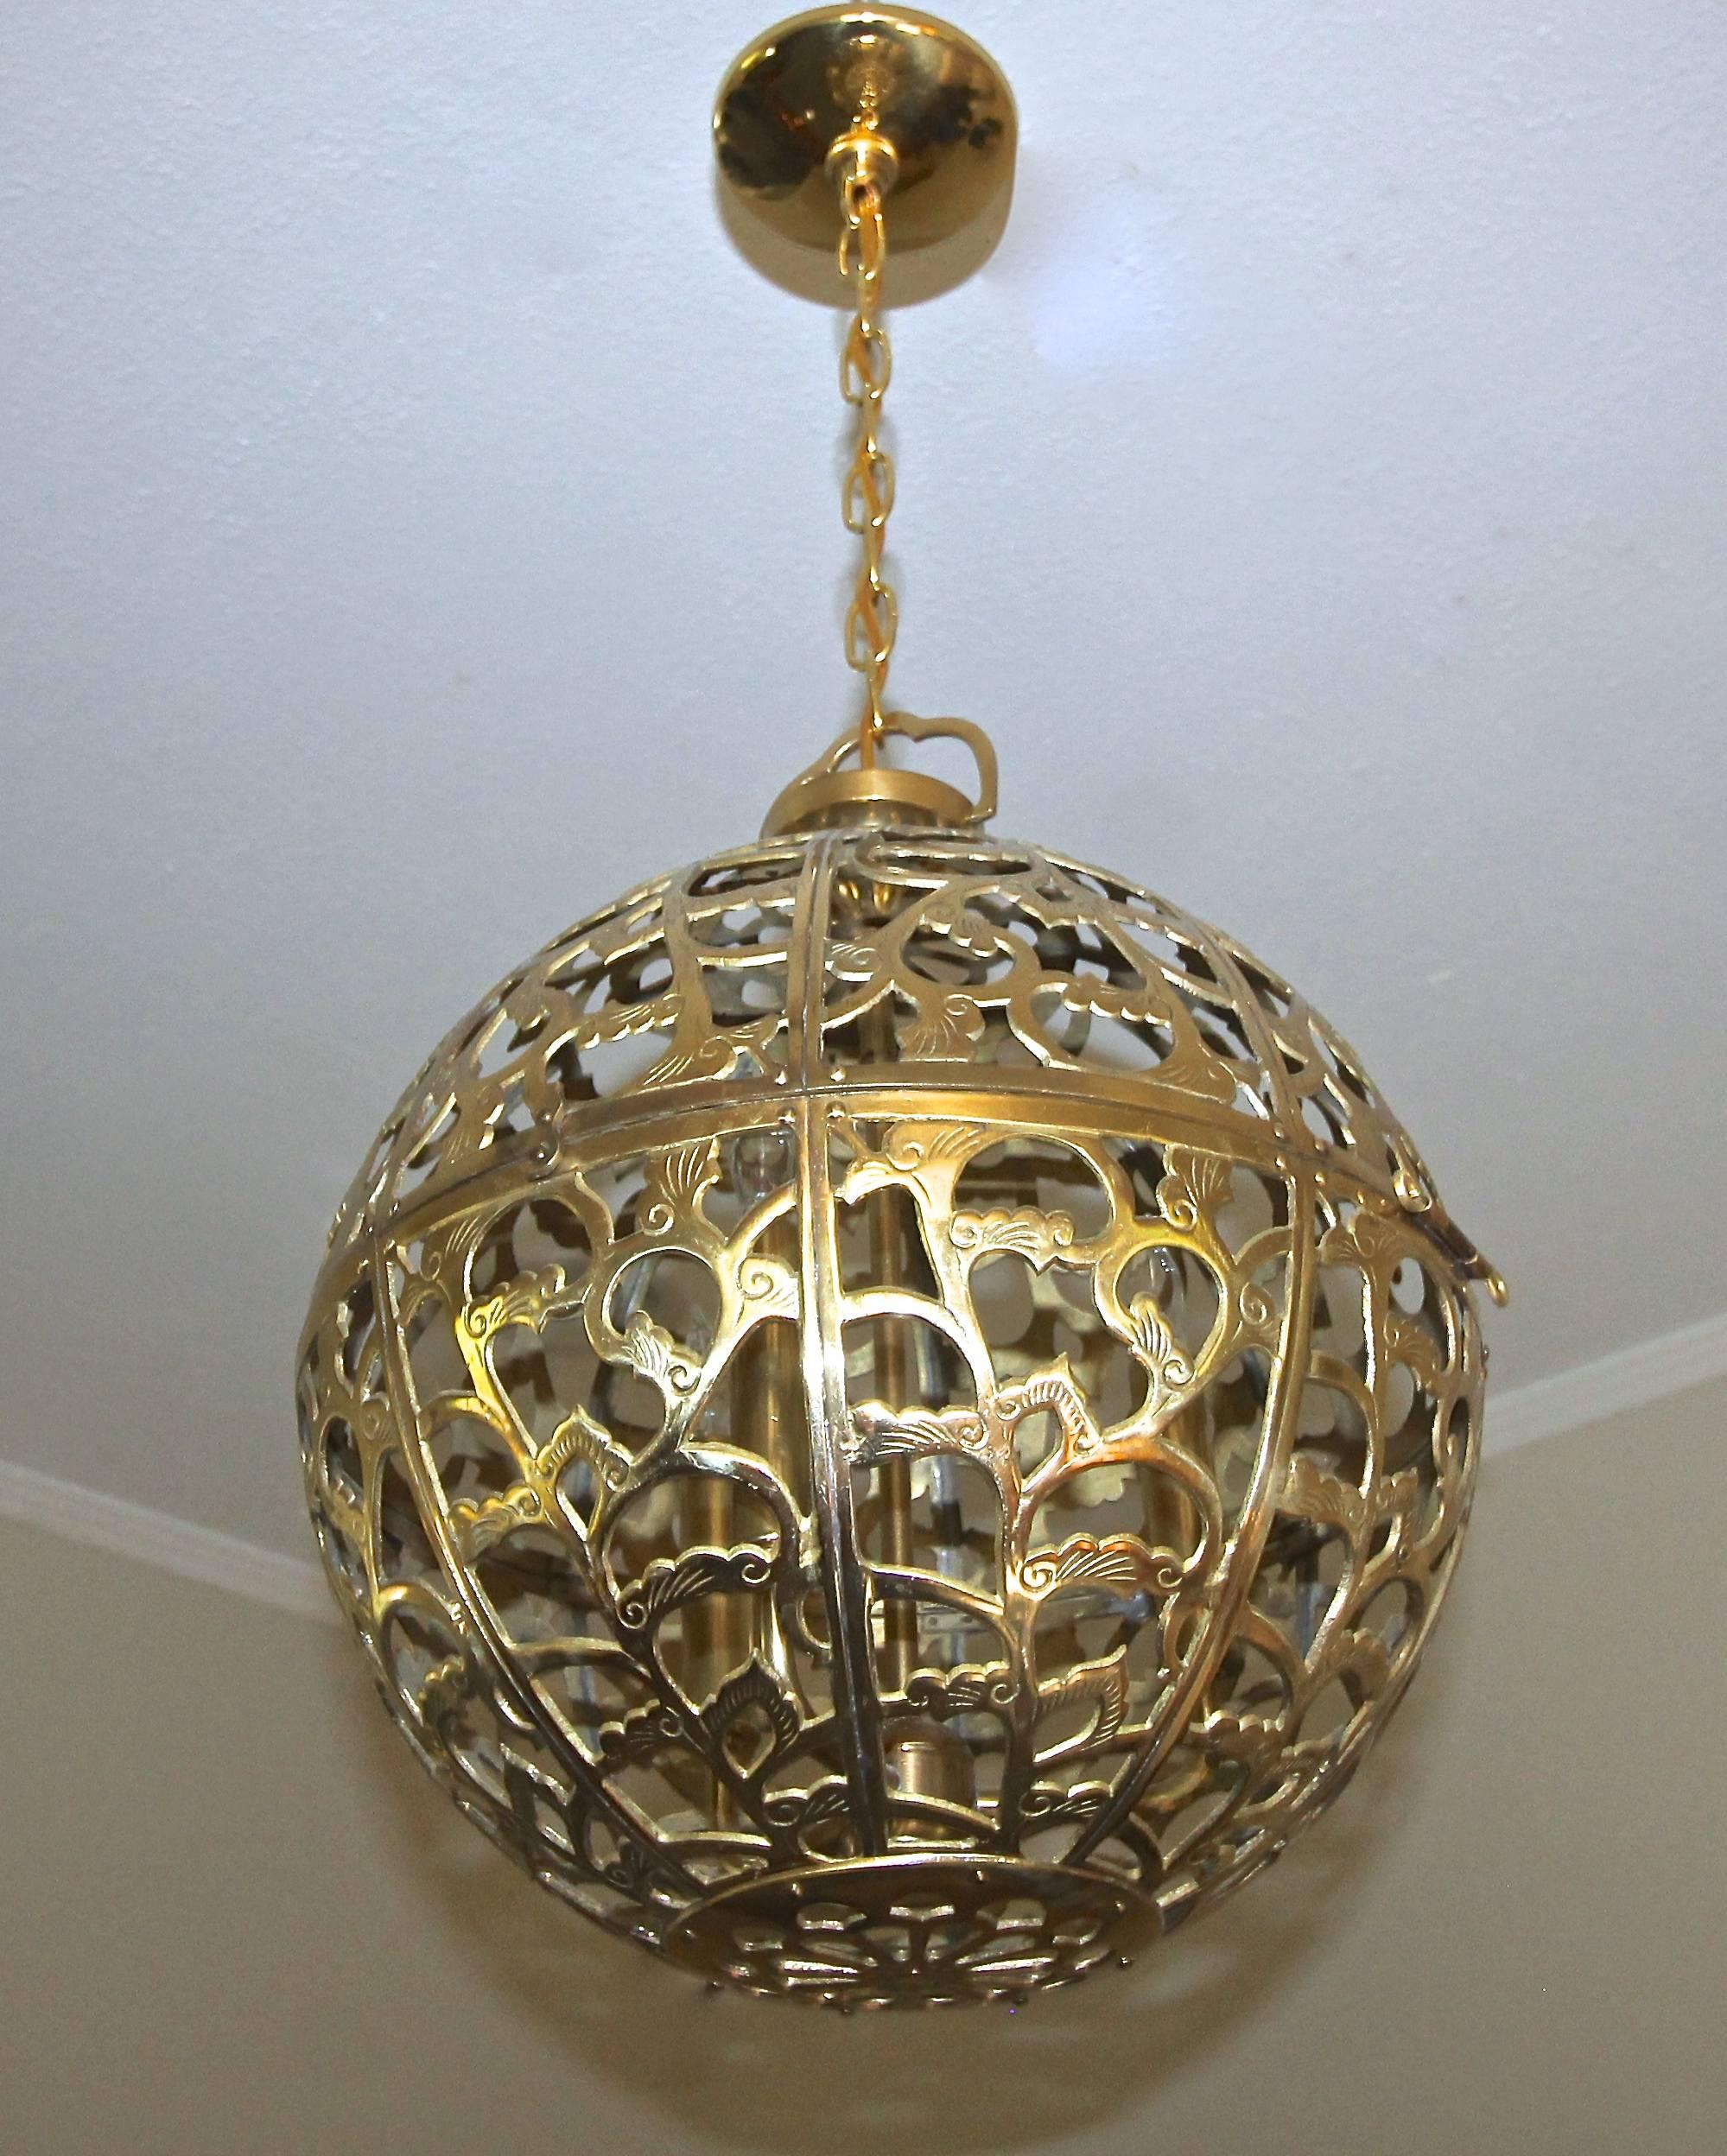 A large and high quality filigree brass ceiling or pendant light with scrolling arabesque patterns. Handcrafted from thick solid brass in Japan in the 1950s, this pendant has been refitted with a custom brass triple light cluster for a more